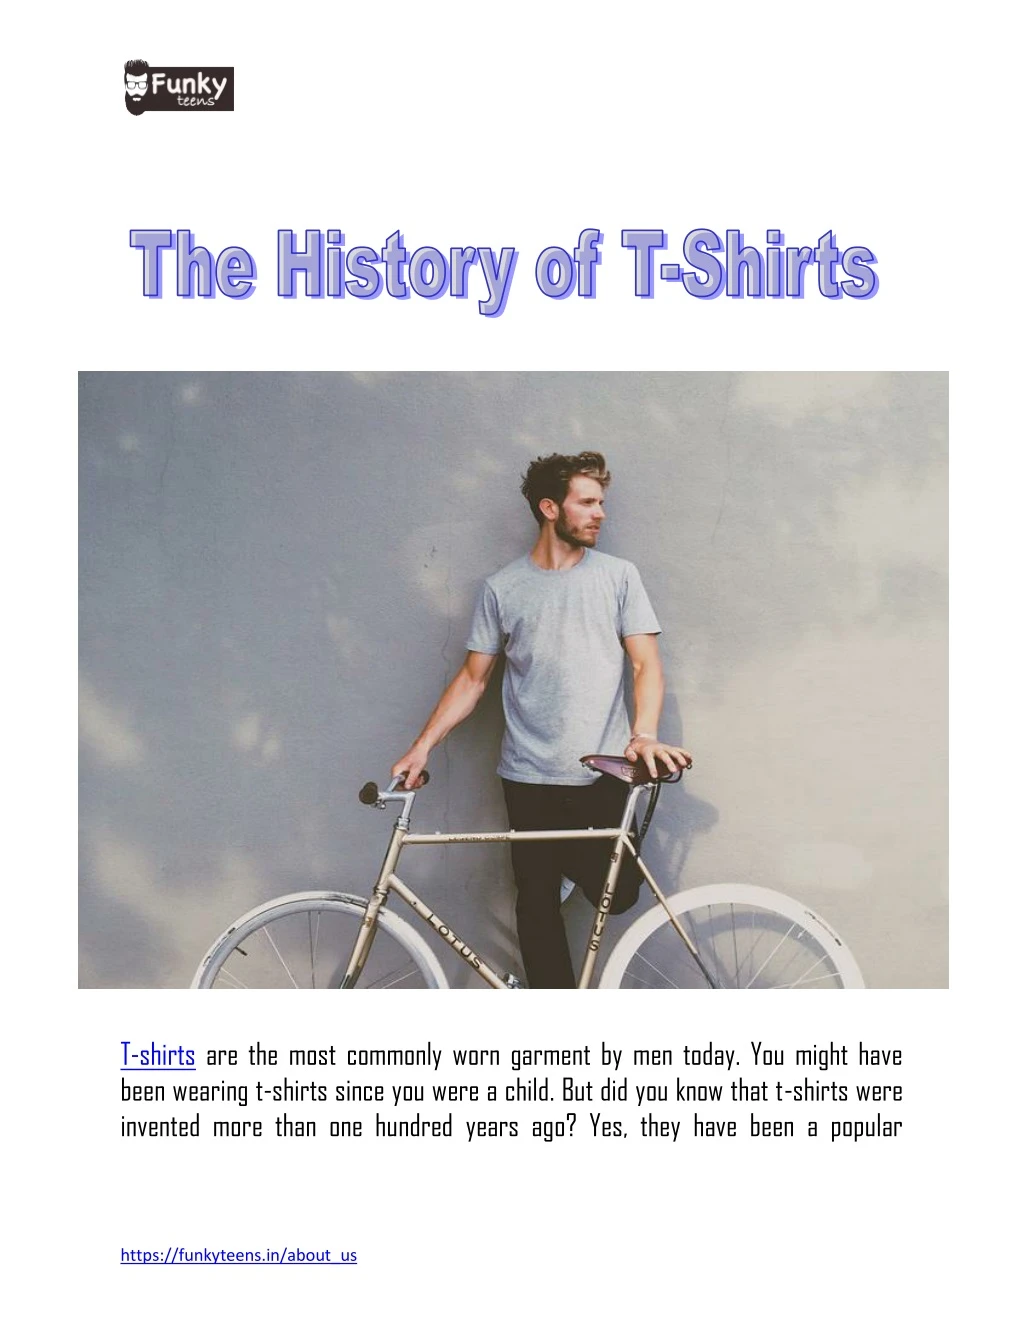 t shirts are the most commonly worn garment